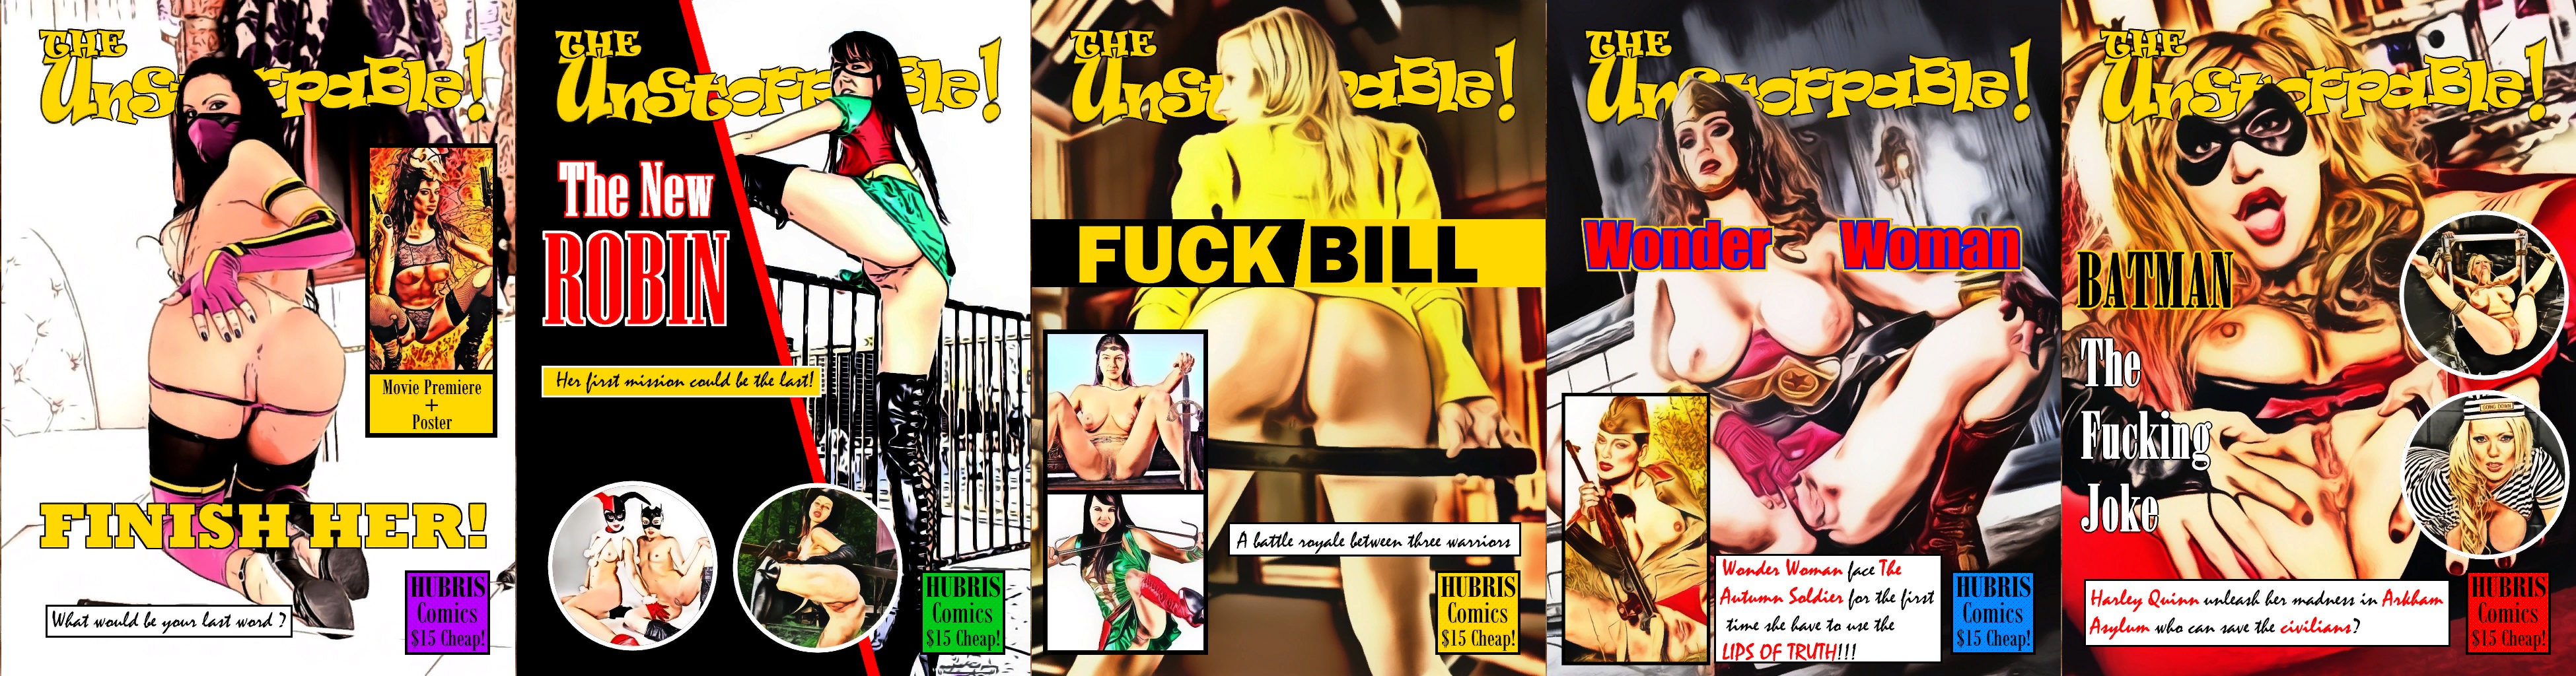 Adult Cover Magazines Page 2 Downloads Fallout 4 Adult And Sex Mods